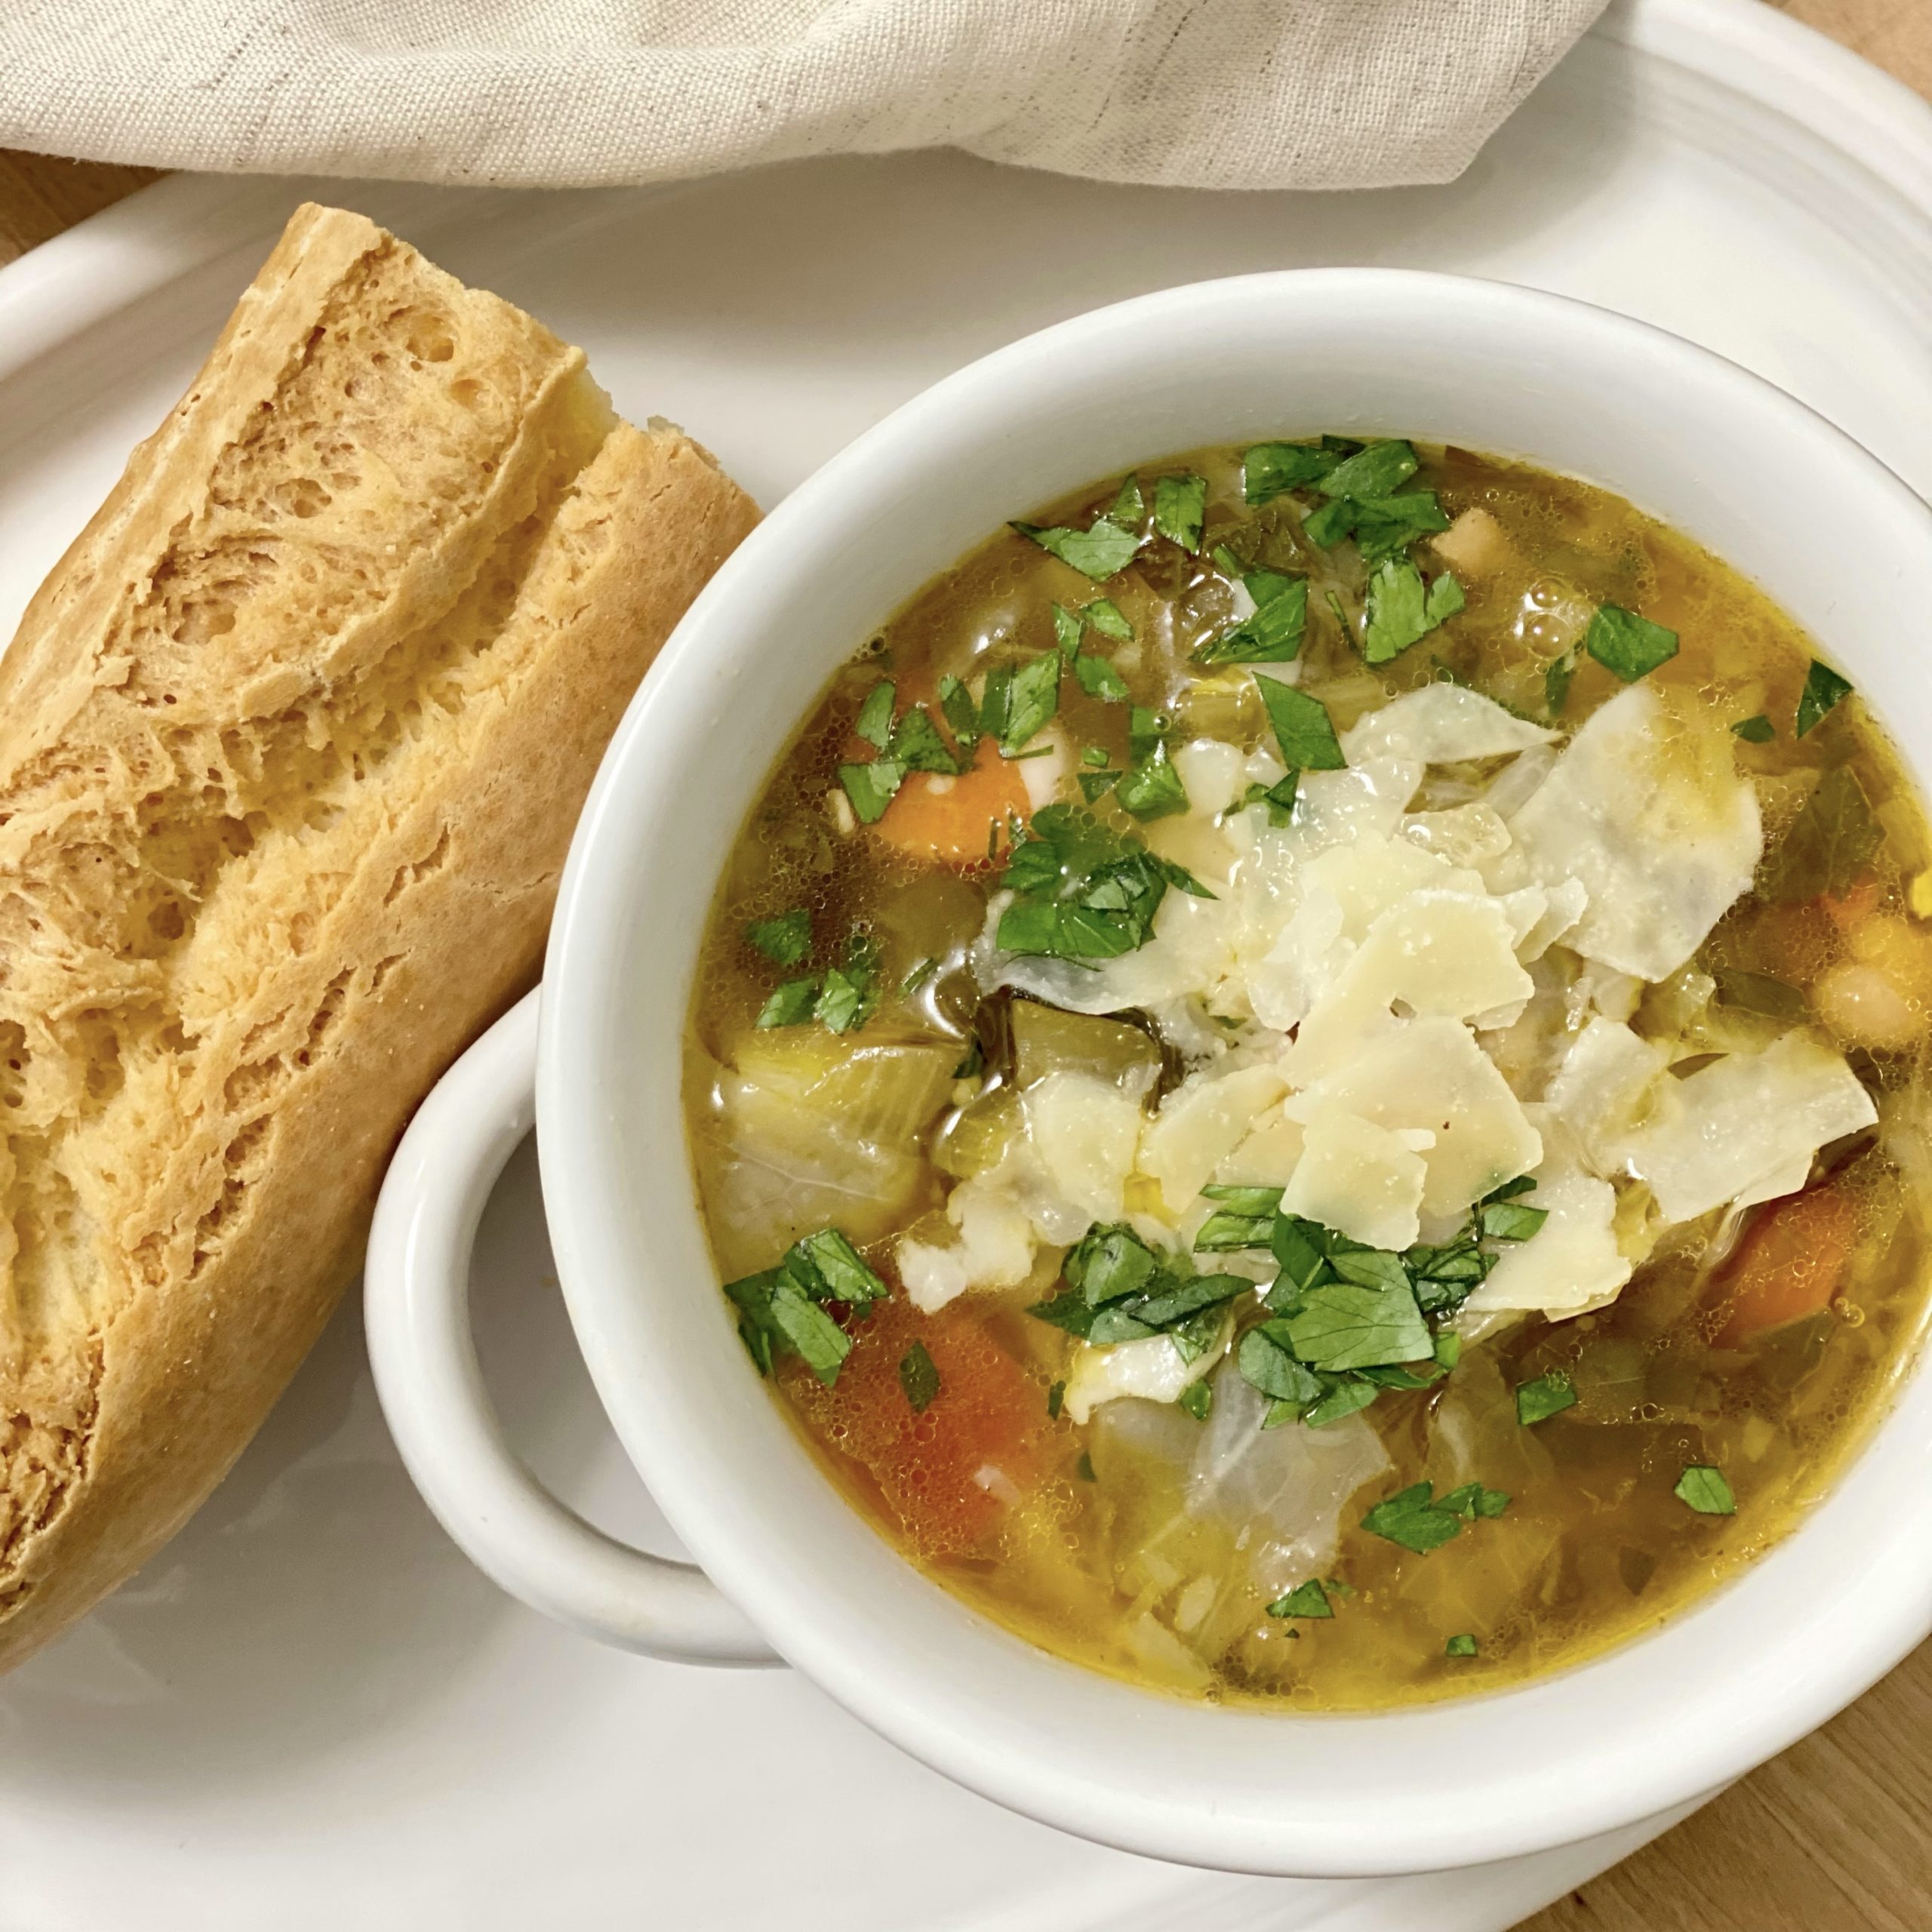 A bowl of minestrone soup with bread on the side.